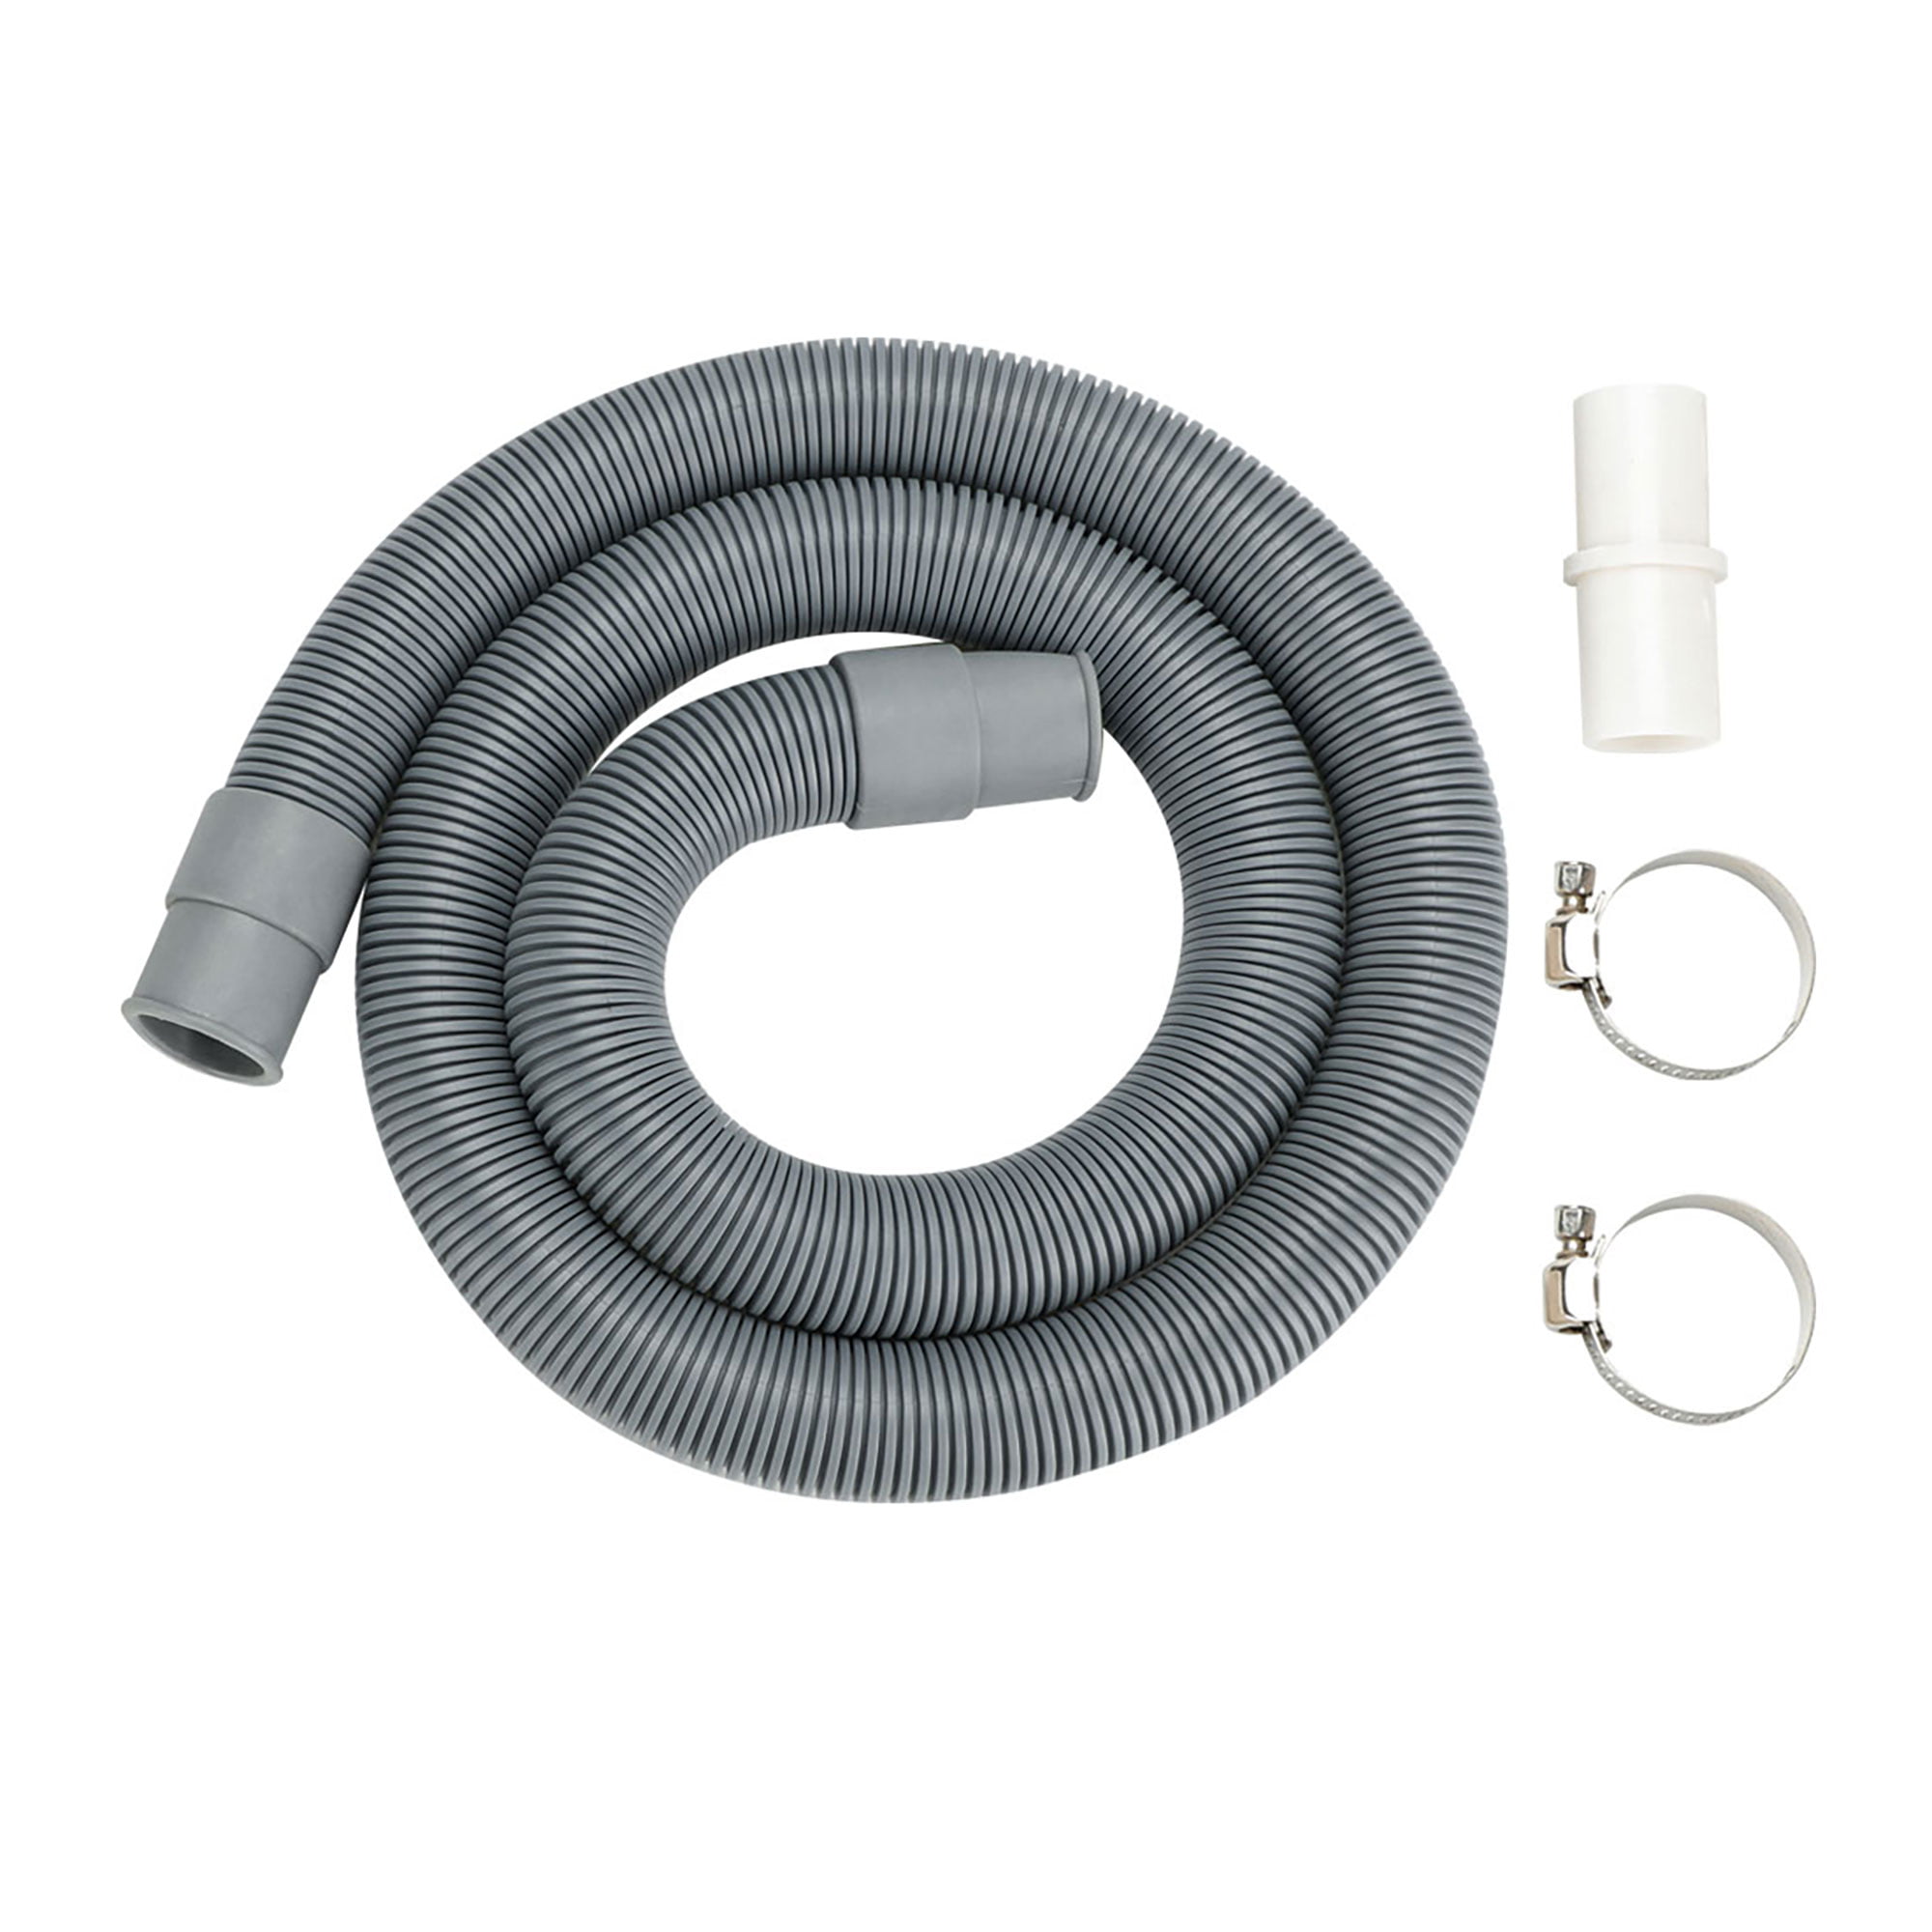 3 3ft Universal Wash Machine Drain Hose With Connector With 2 Hose